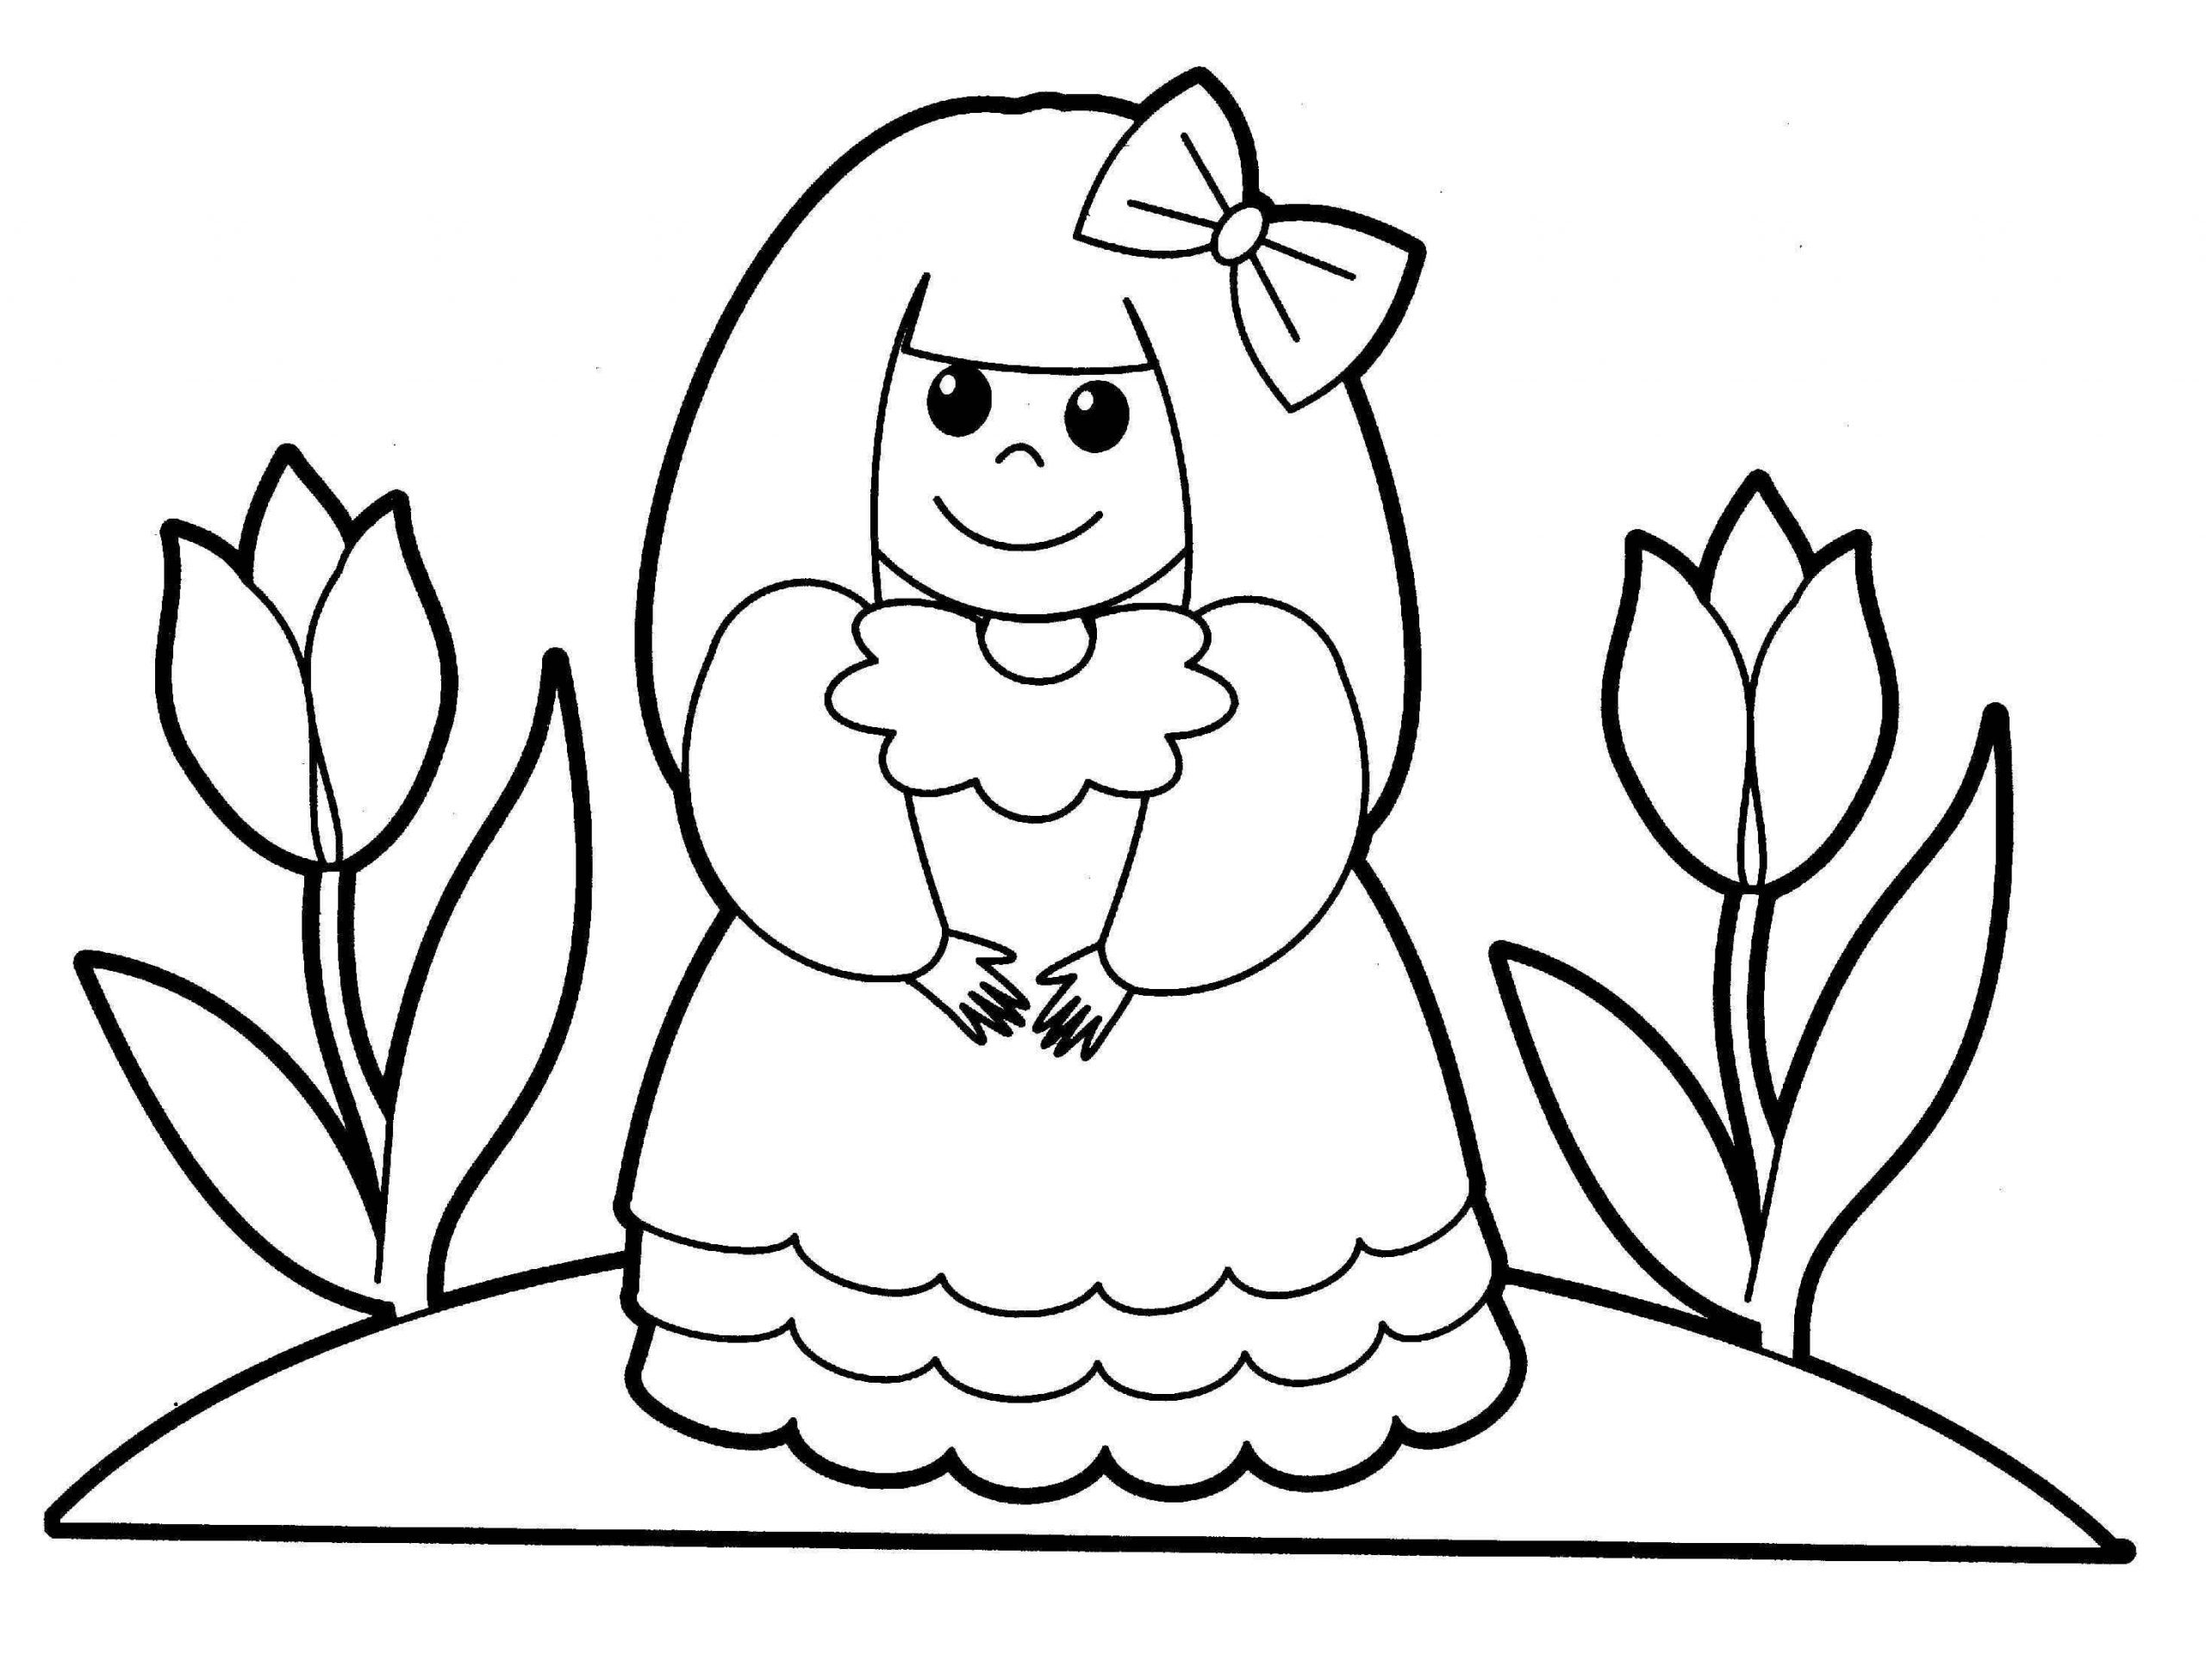 Coloring Pages : Peopleg Books For Adults Pages Kids Black Famous People  Coloring Books ~ Off-The Wall ATL